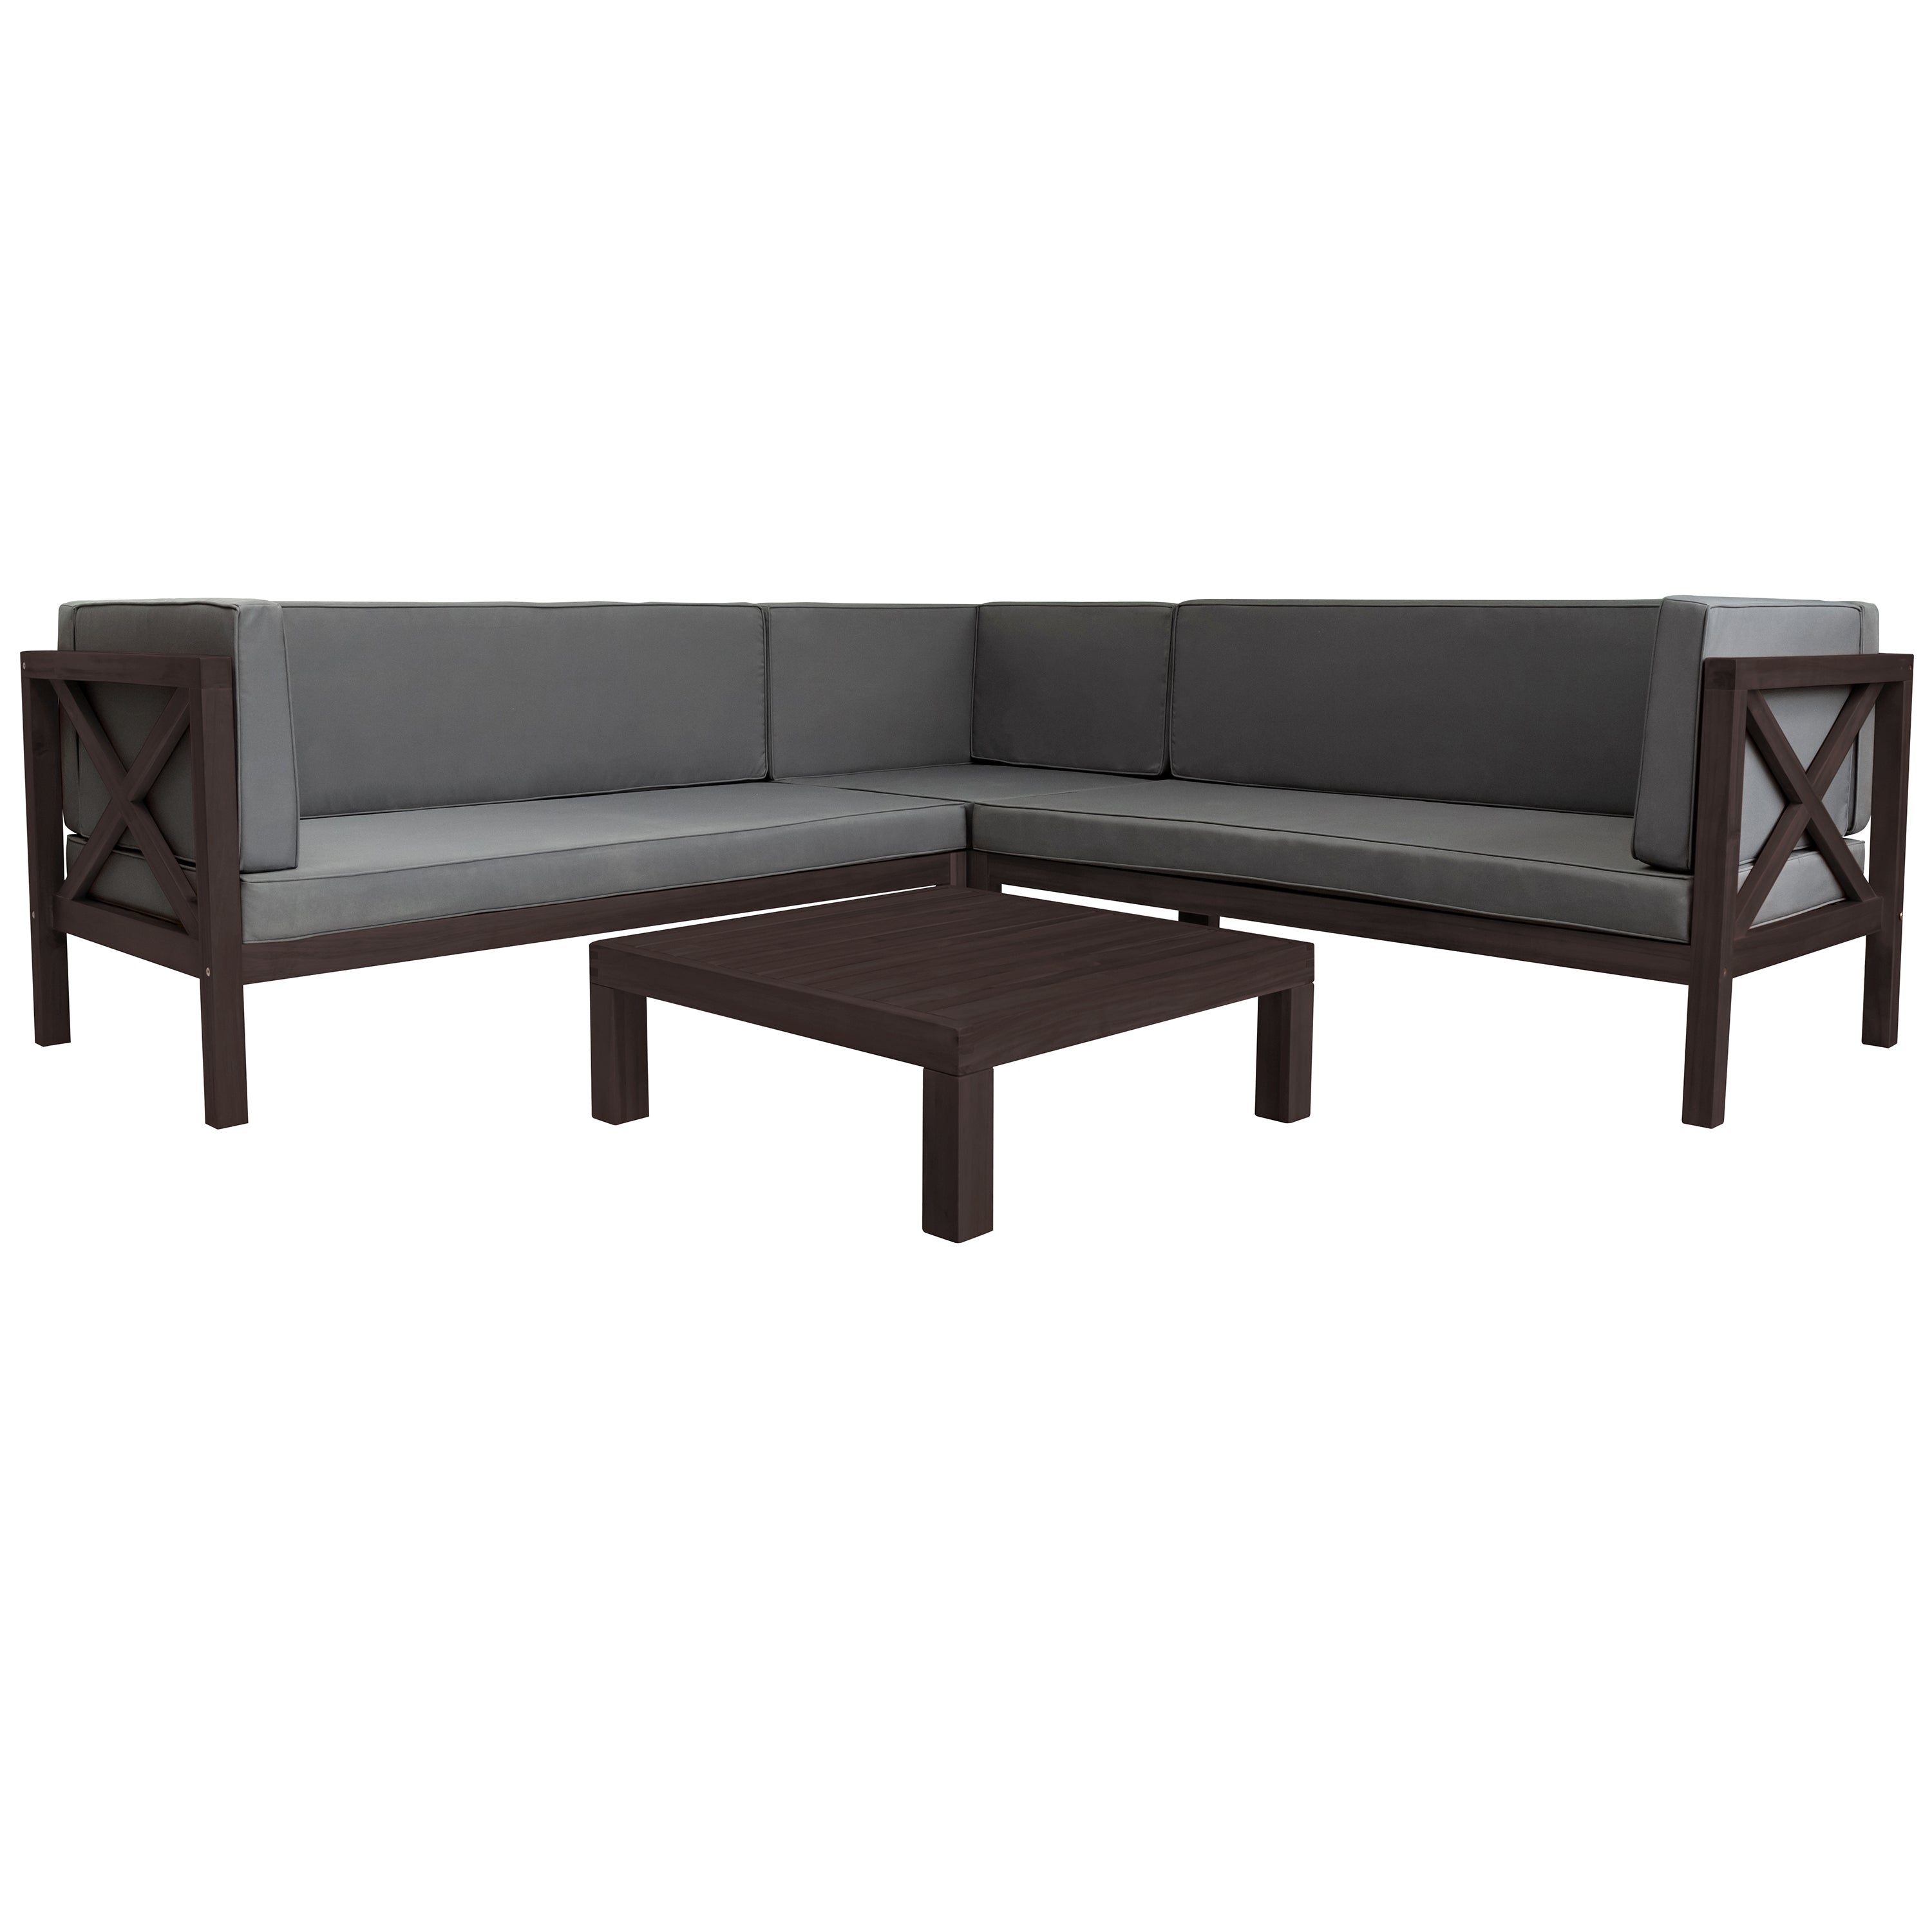 4-Piece Patio Wood Sectional Seating Group with Cushions and Table X-Back Sofa Set-Boyel Living